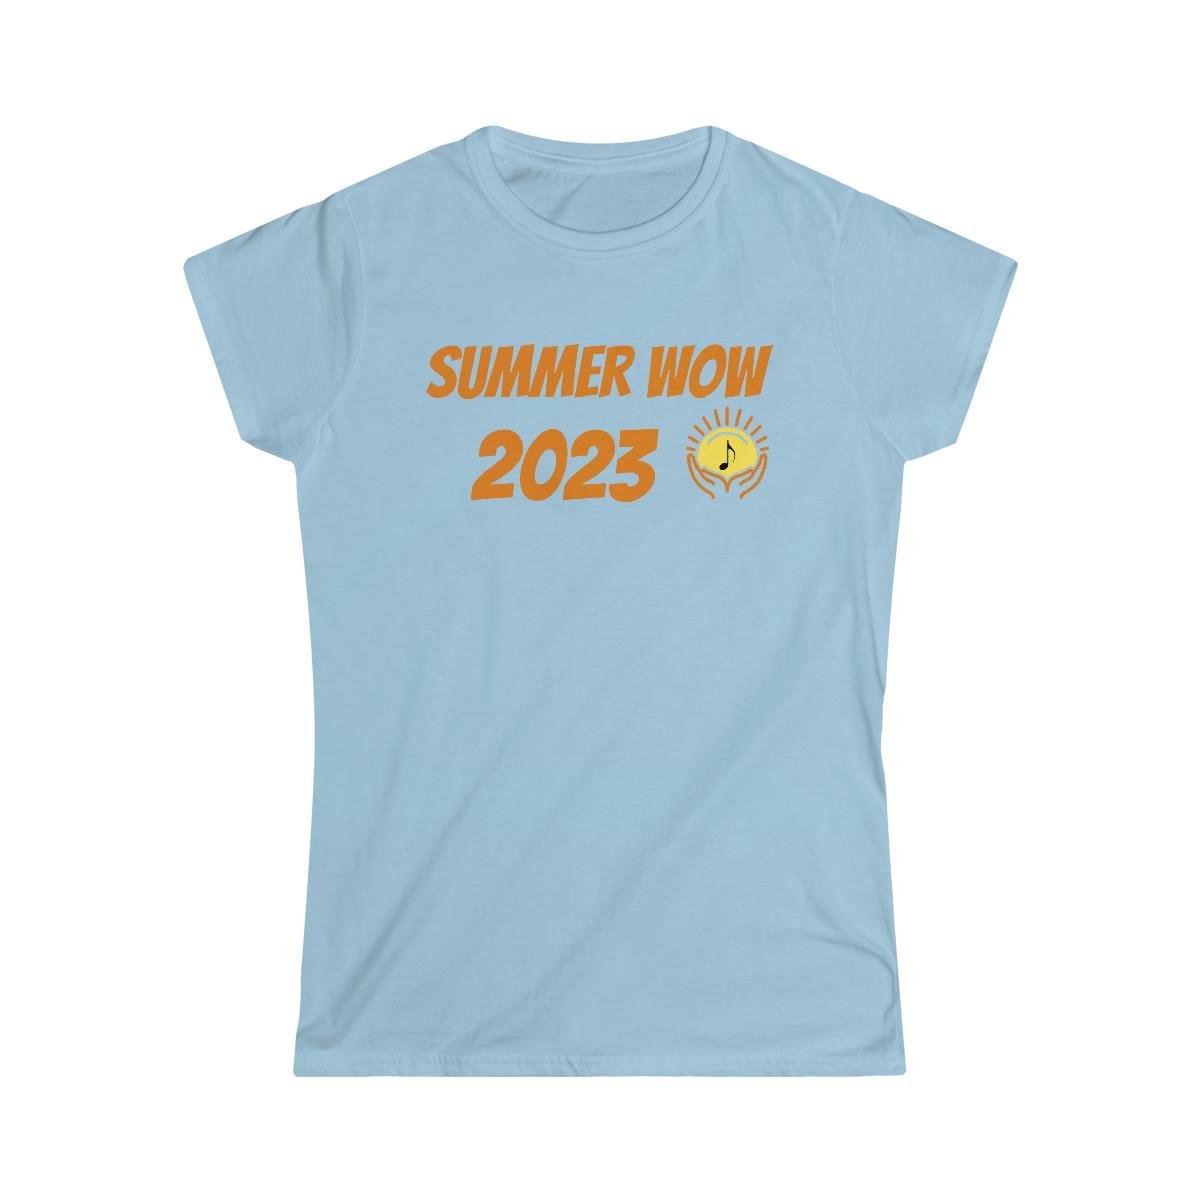 Worship On The Waterfront – Summer WOW 2023 Women’s Short Sleeve Tshirt